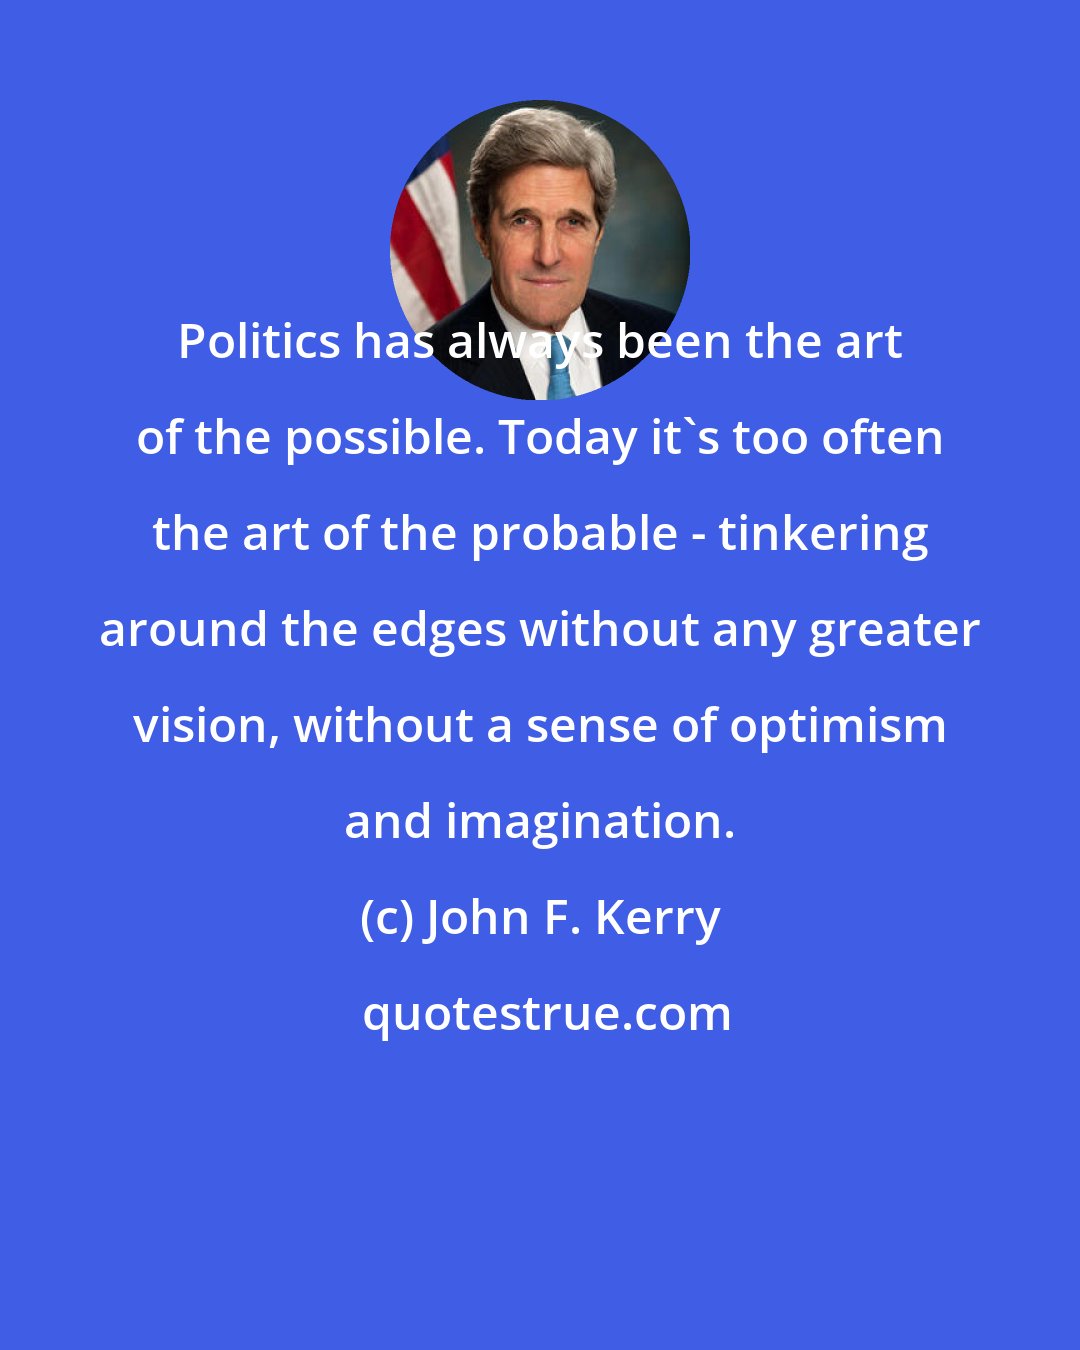 John F. Kerry: Politics has always been the art of the possible. Today it's too often the art of the probable - tinkering around the edges without any greater vision, without a sense of optimism and imagination.